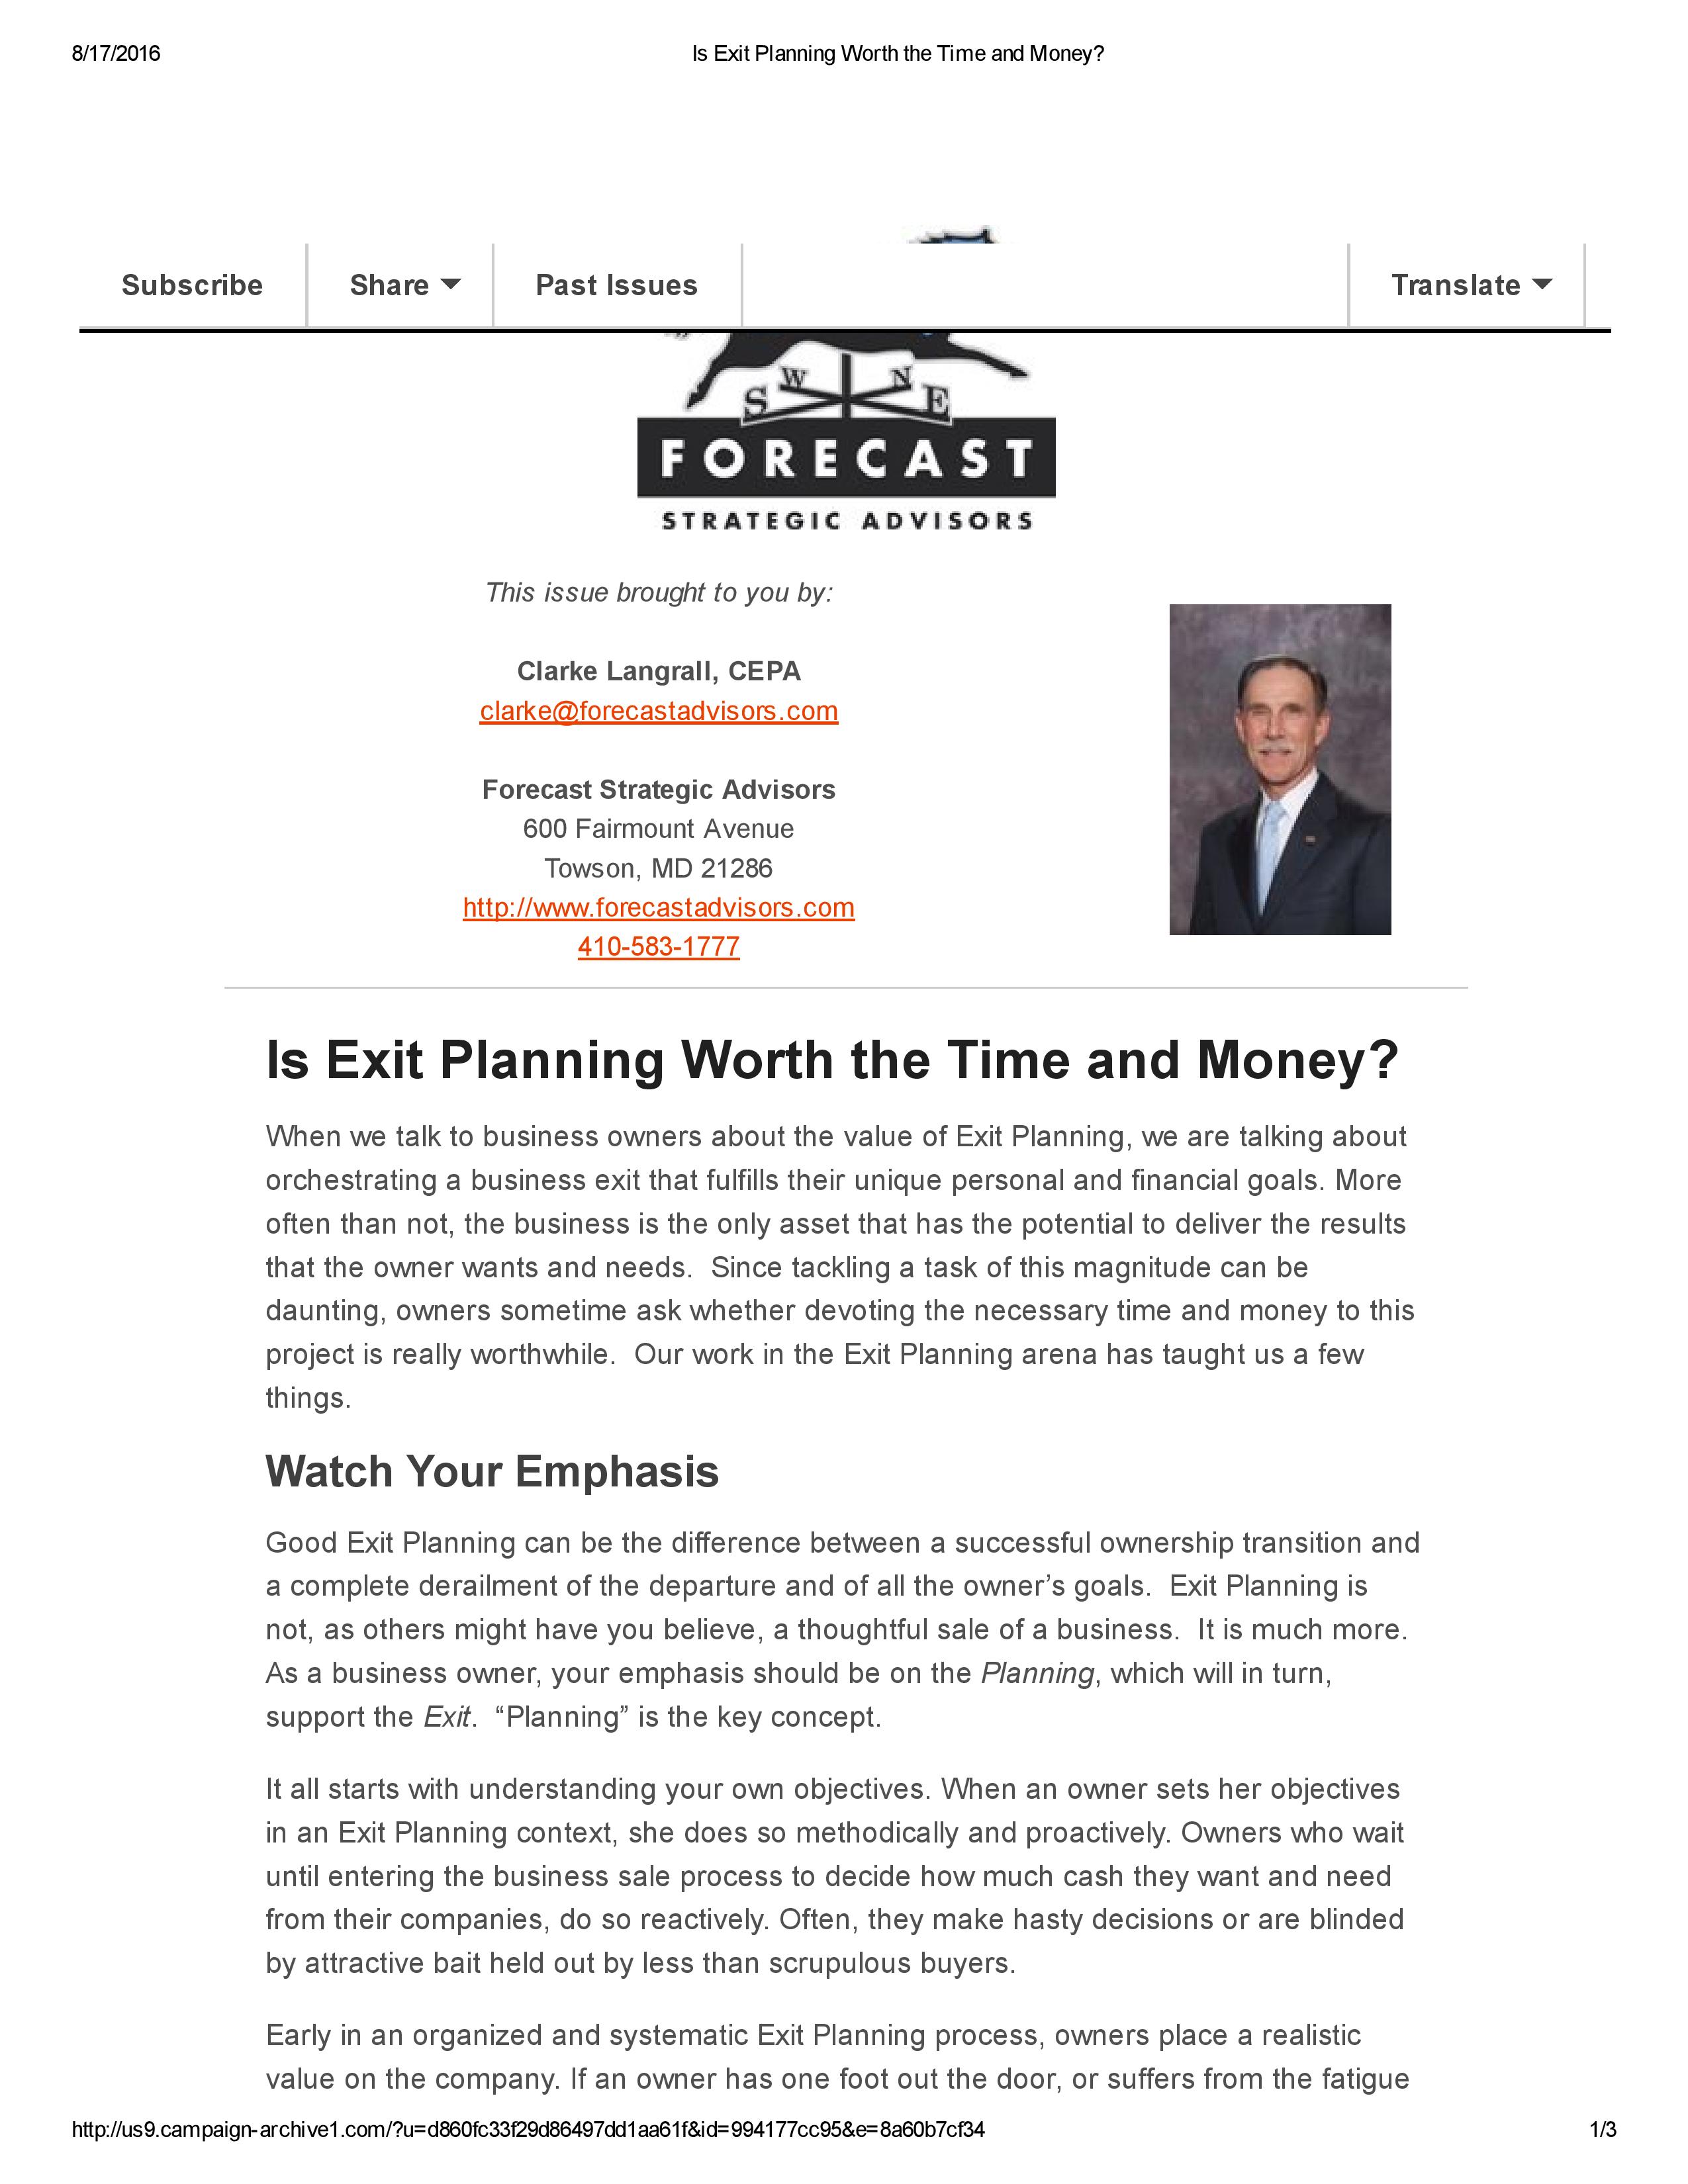 Is Exit Planning Worth the Time and Money_-page-001